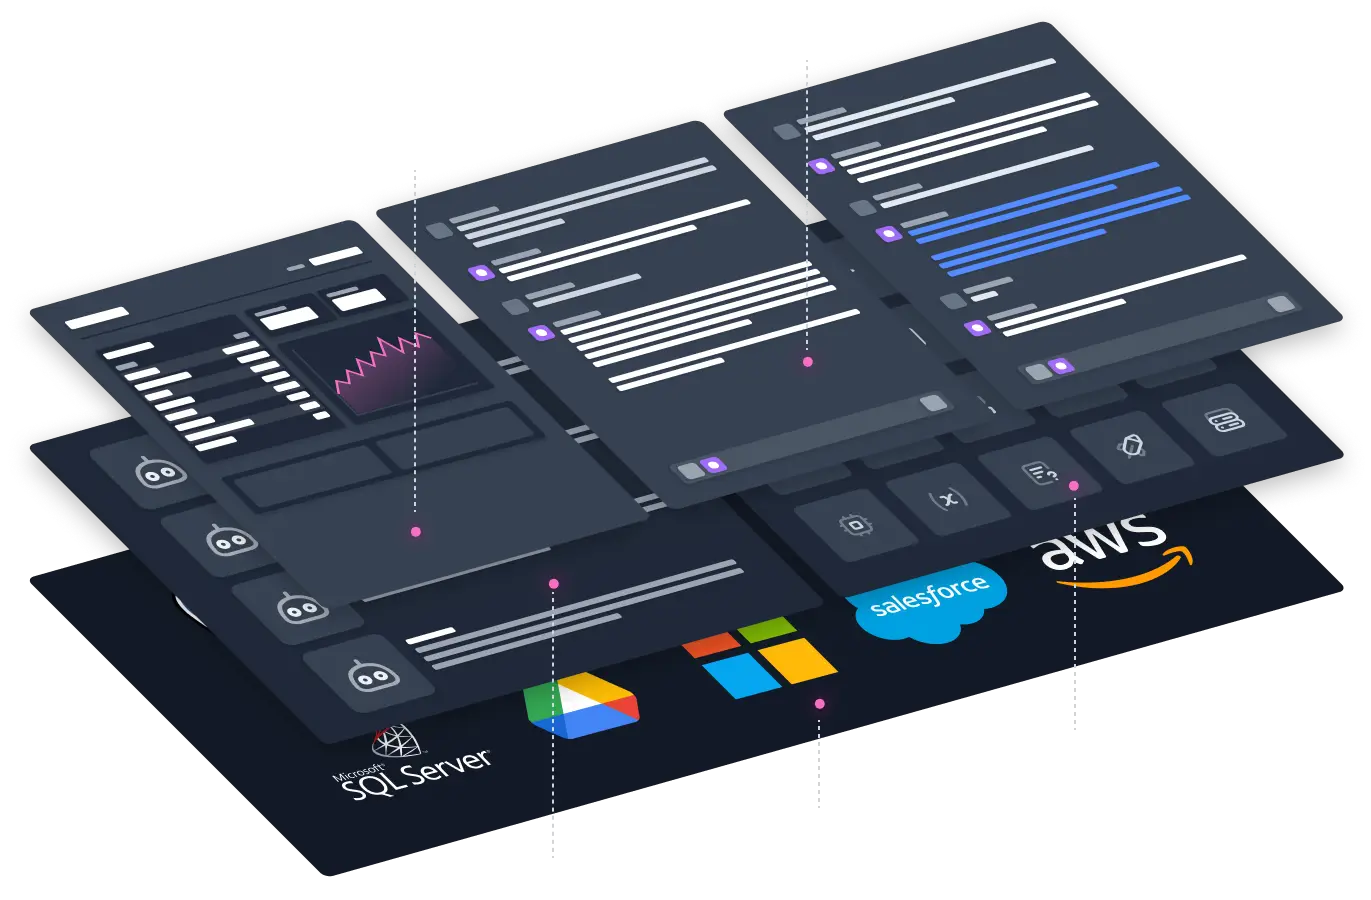 A diagram of a multi-layered software application stack featuring analytics, chat, bots, actions, and data connectors like Salesforce, GitHub, Slack, Atlassian, and Google.